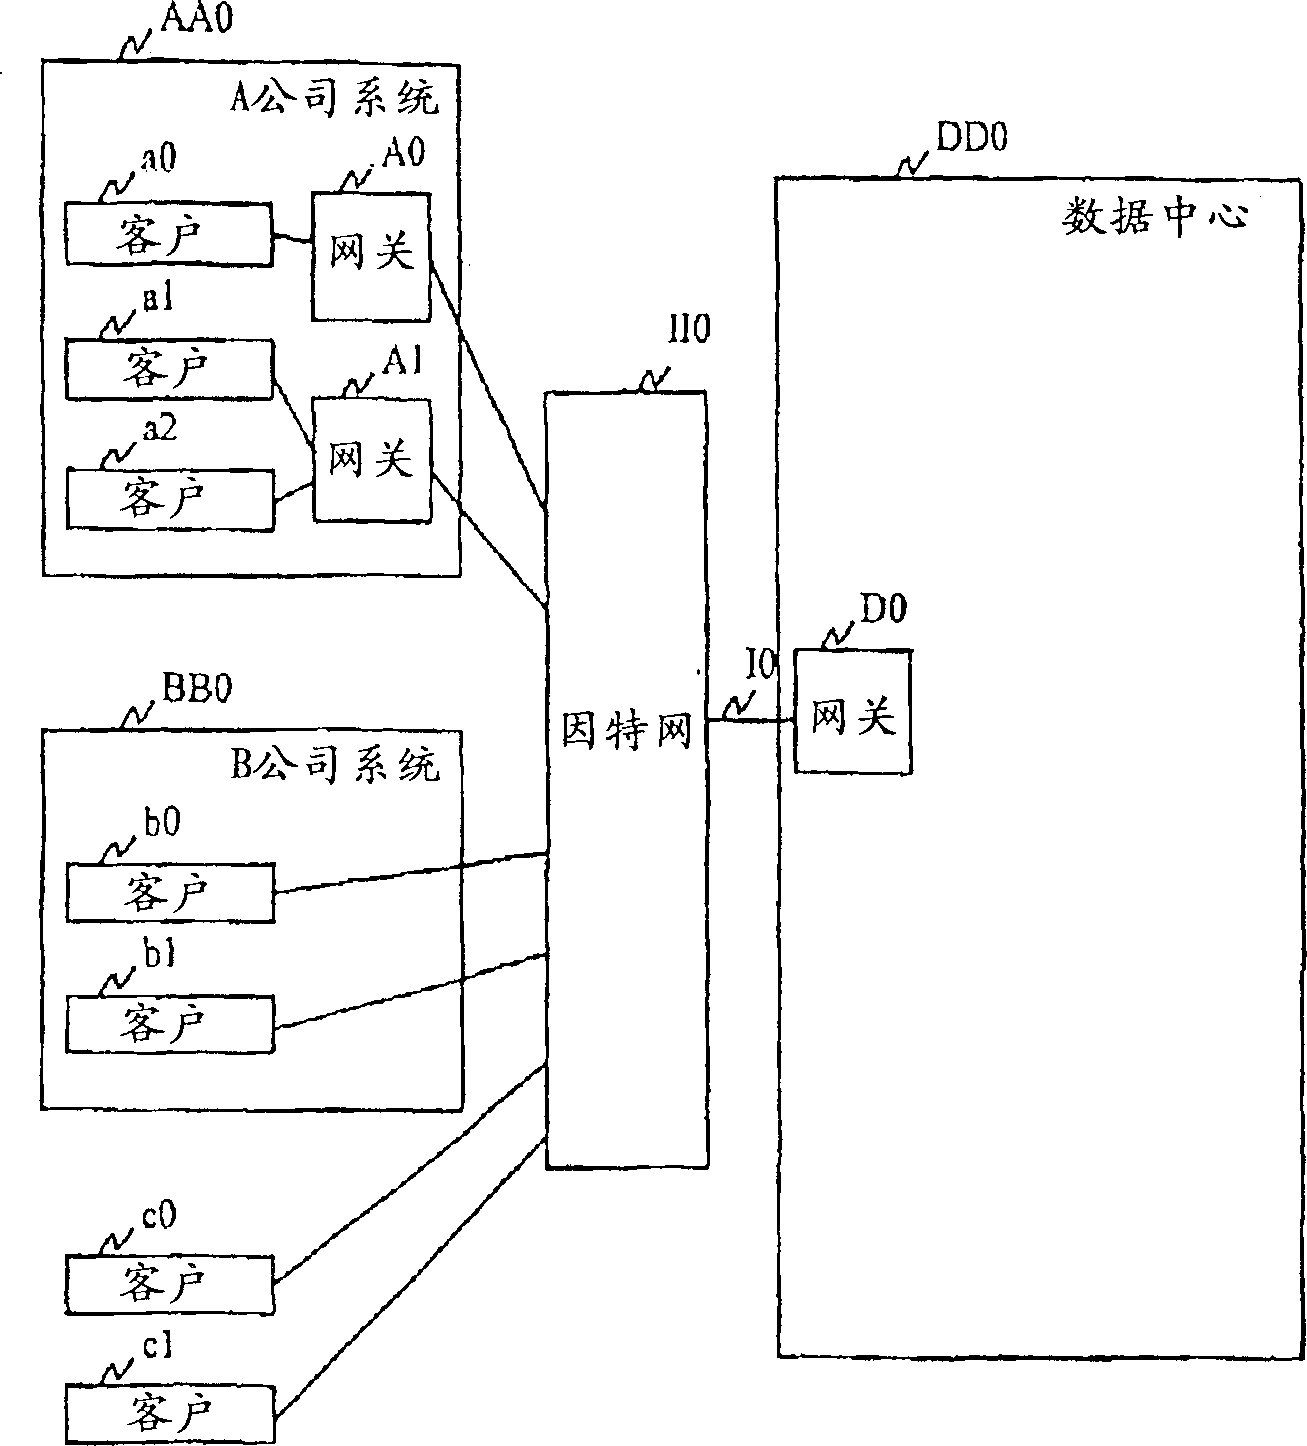 Device and method for dynamic distributing computer resource according to user's agreement